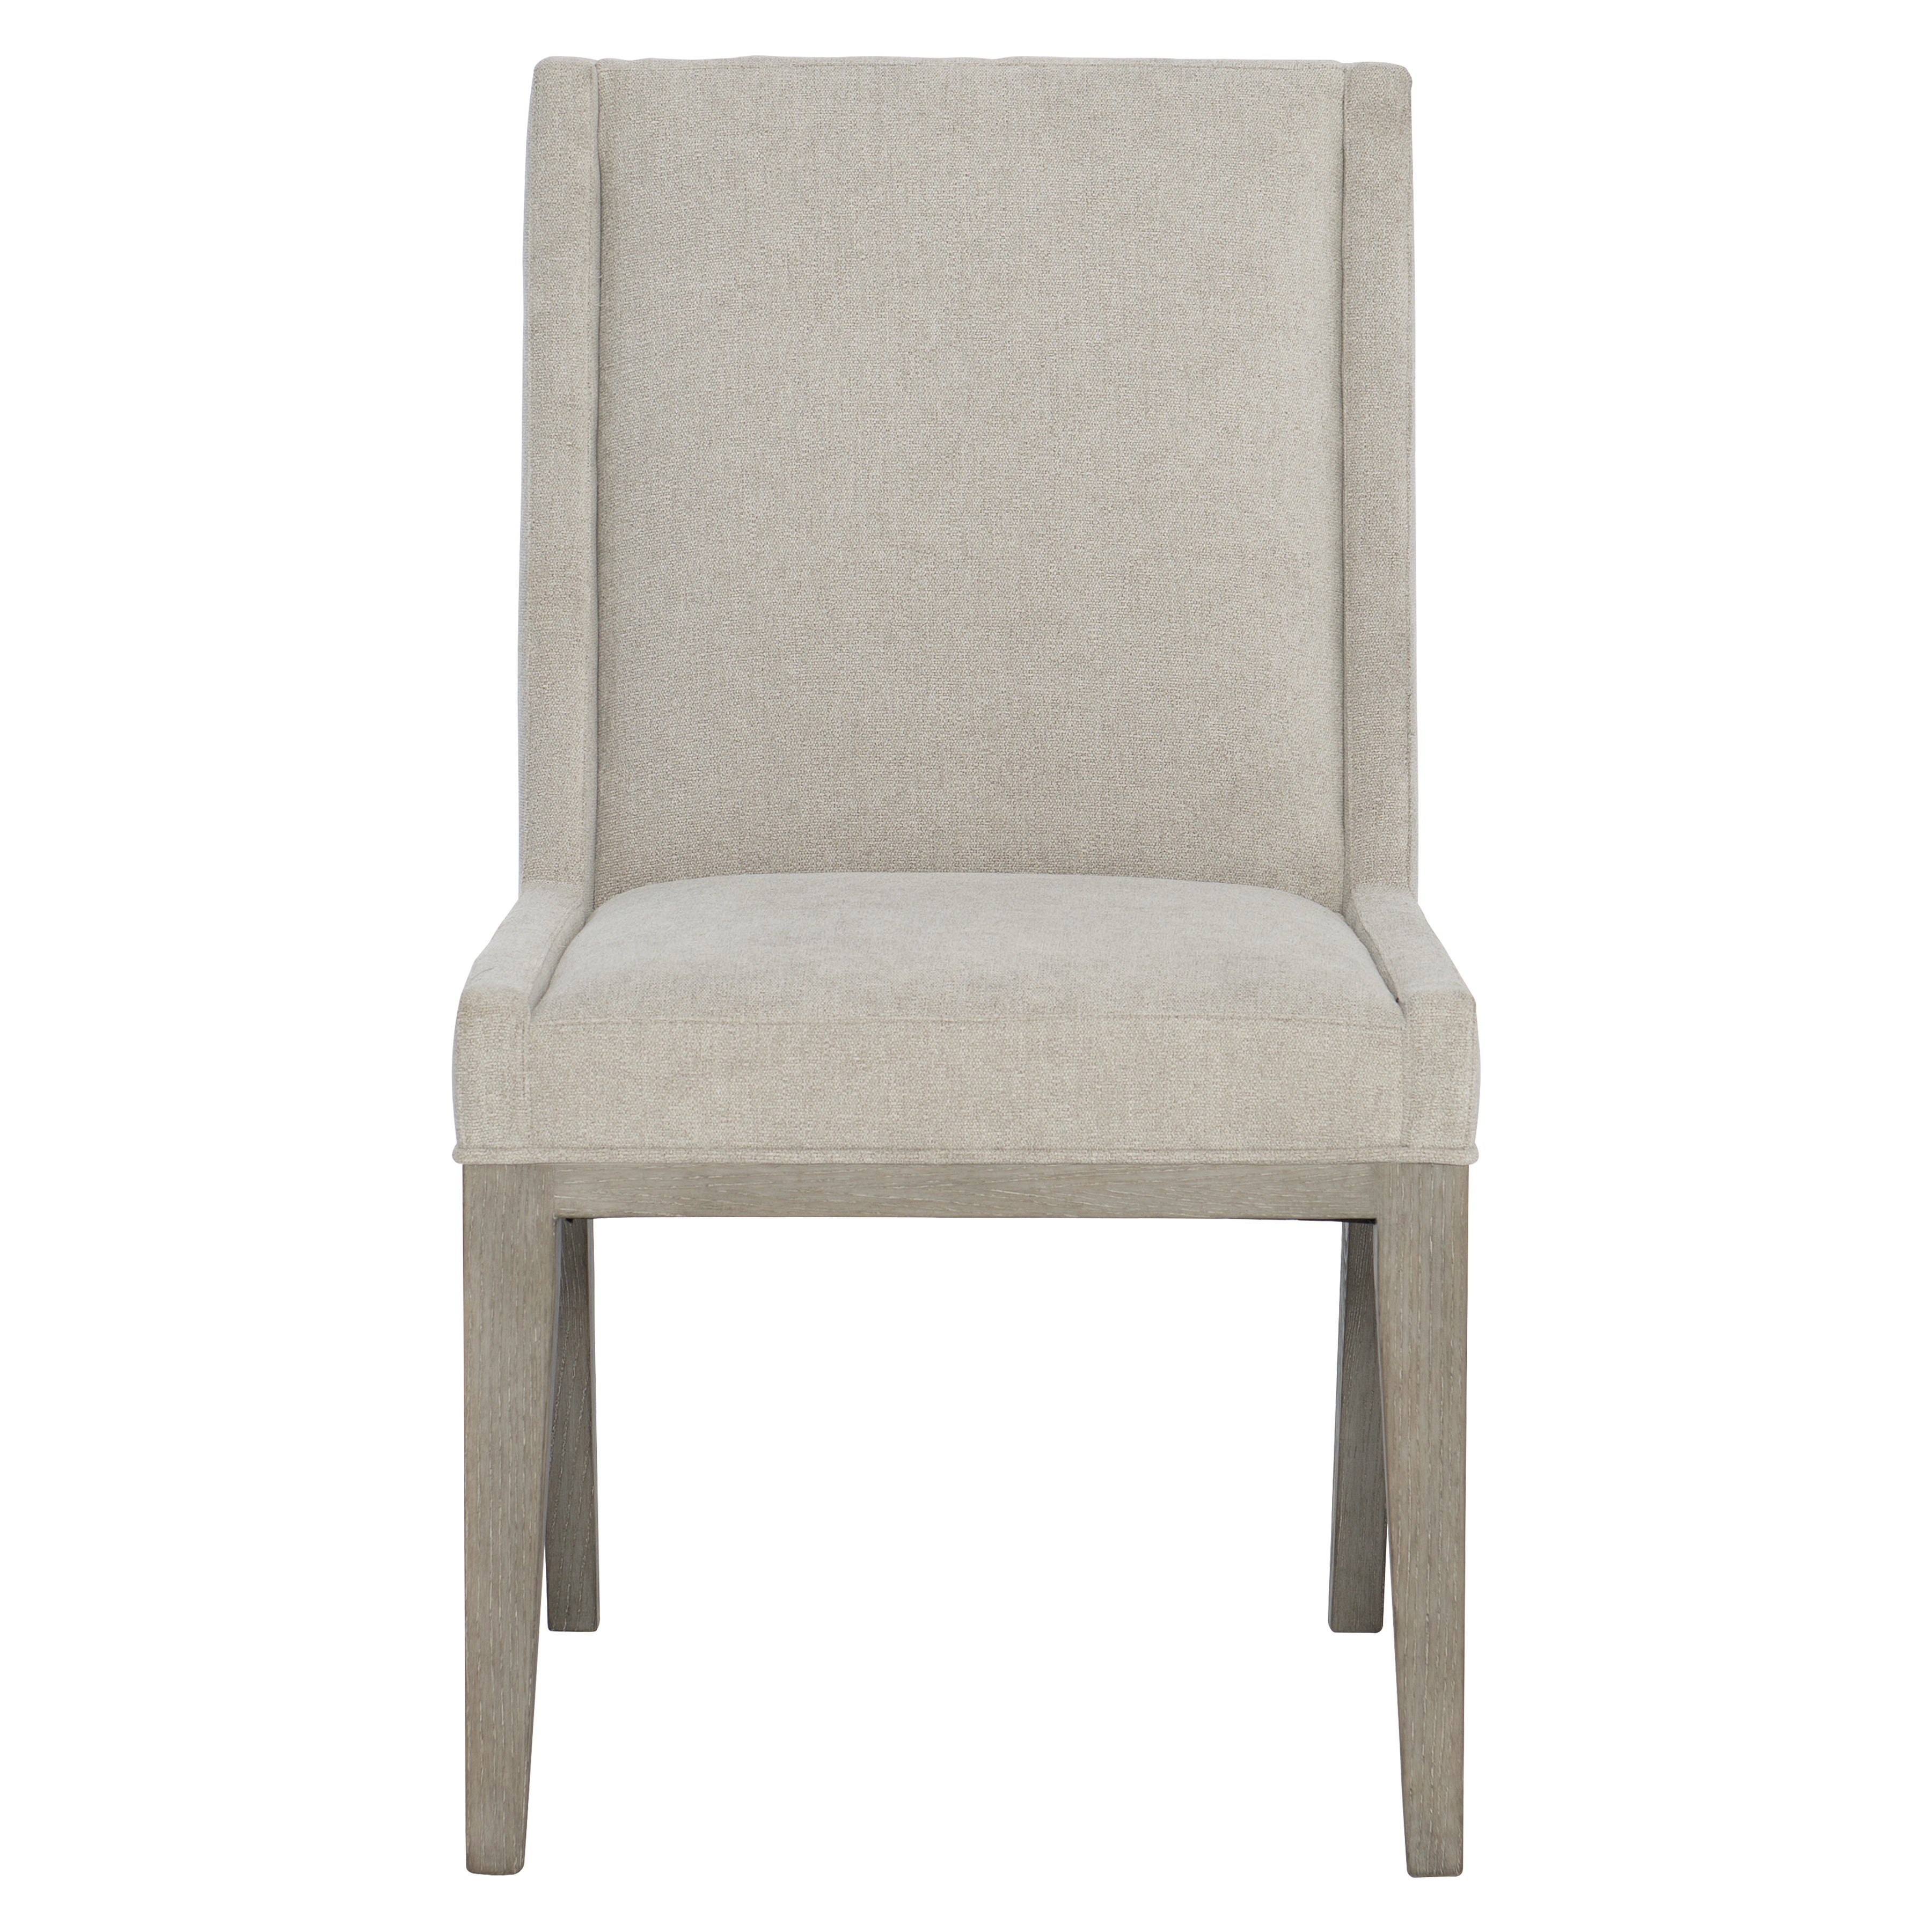 Linea Side Chair in Cerused Greige Finish